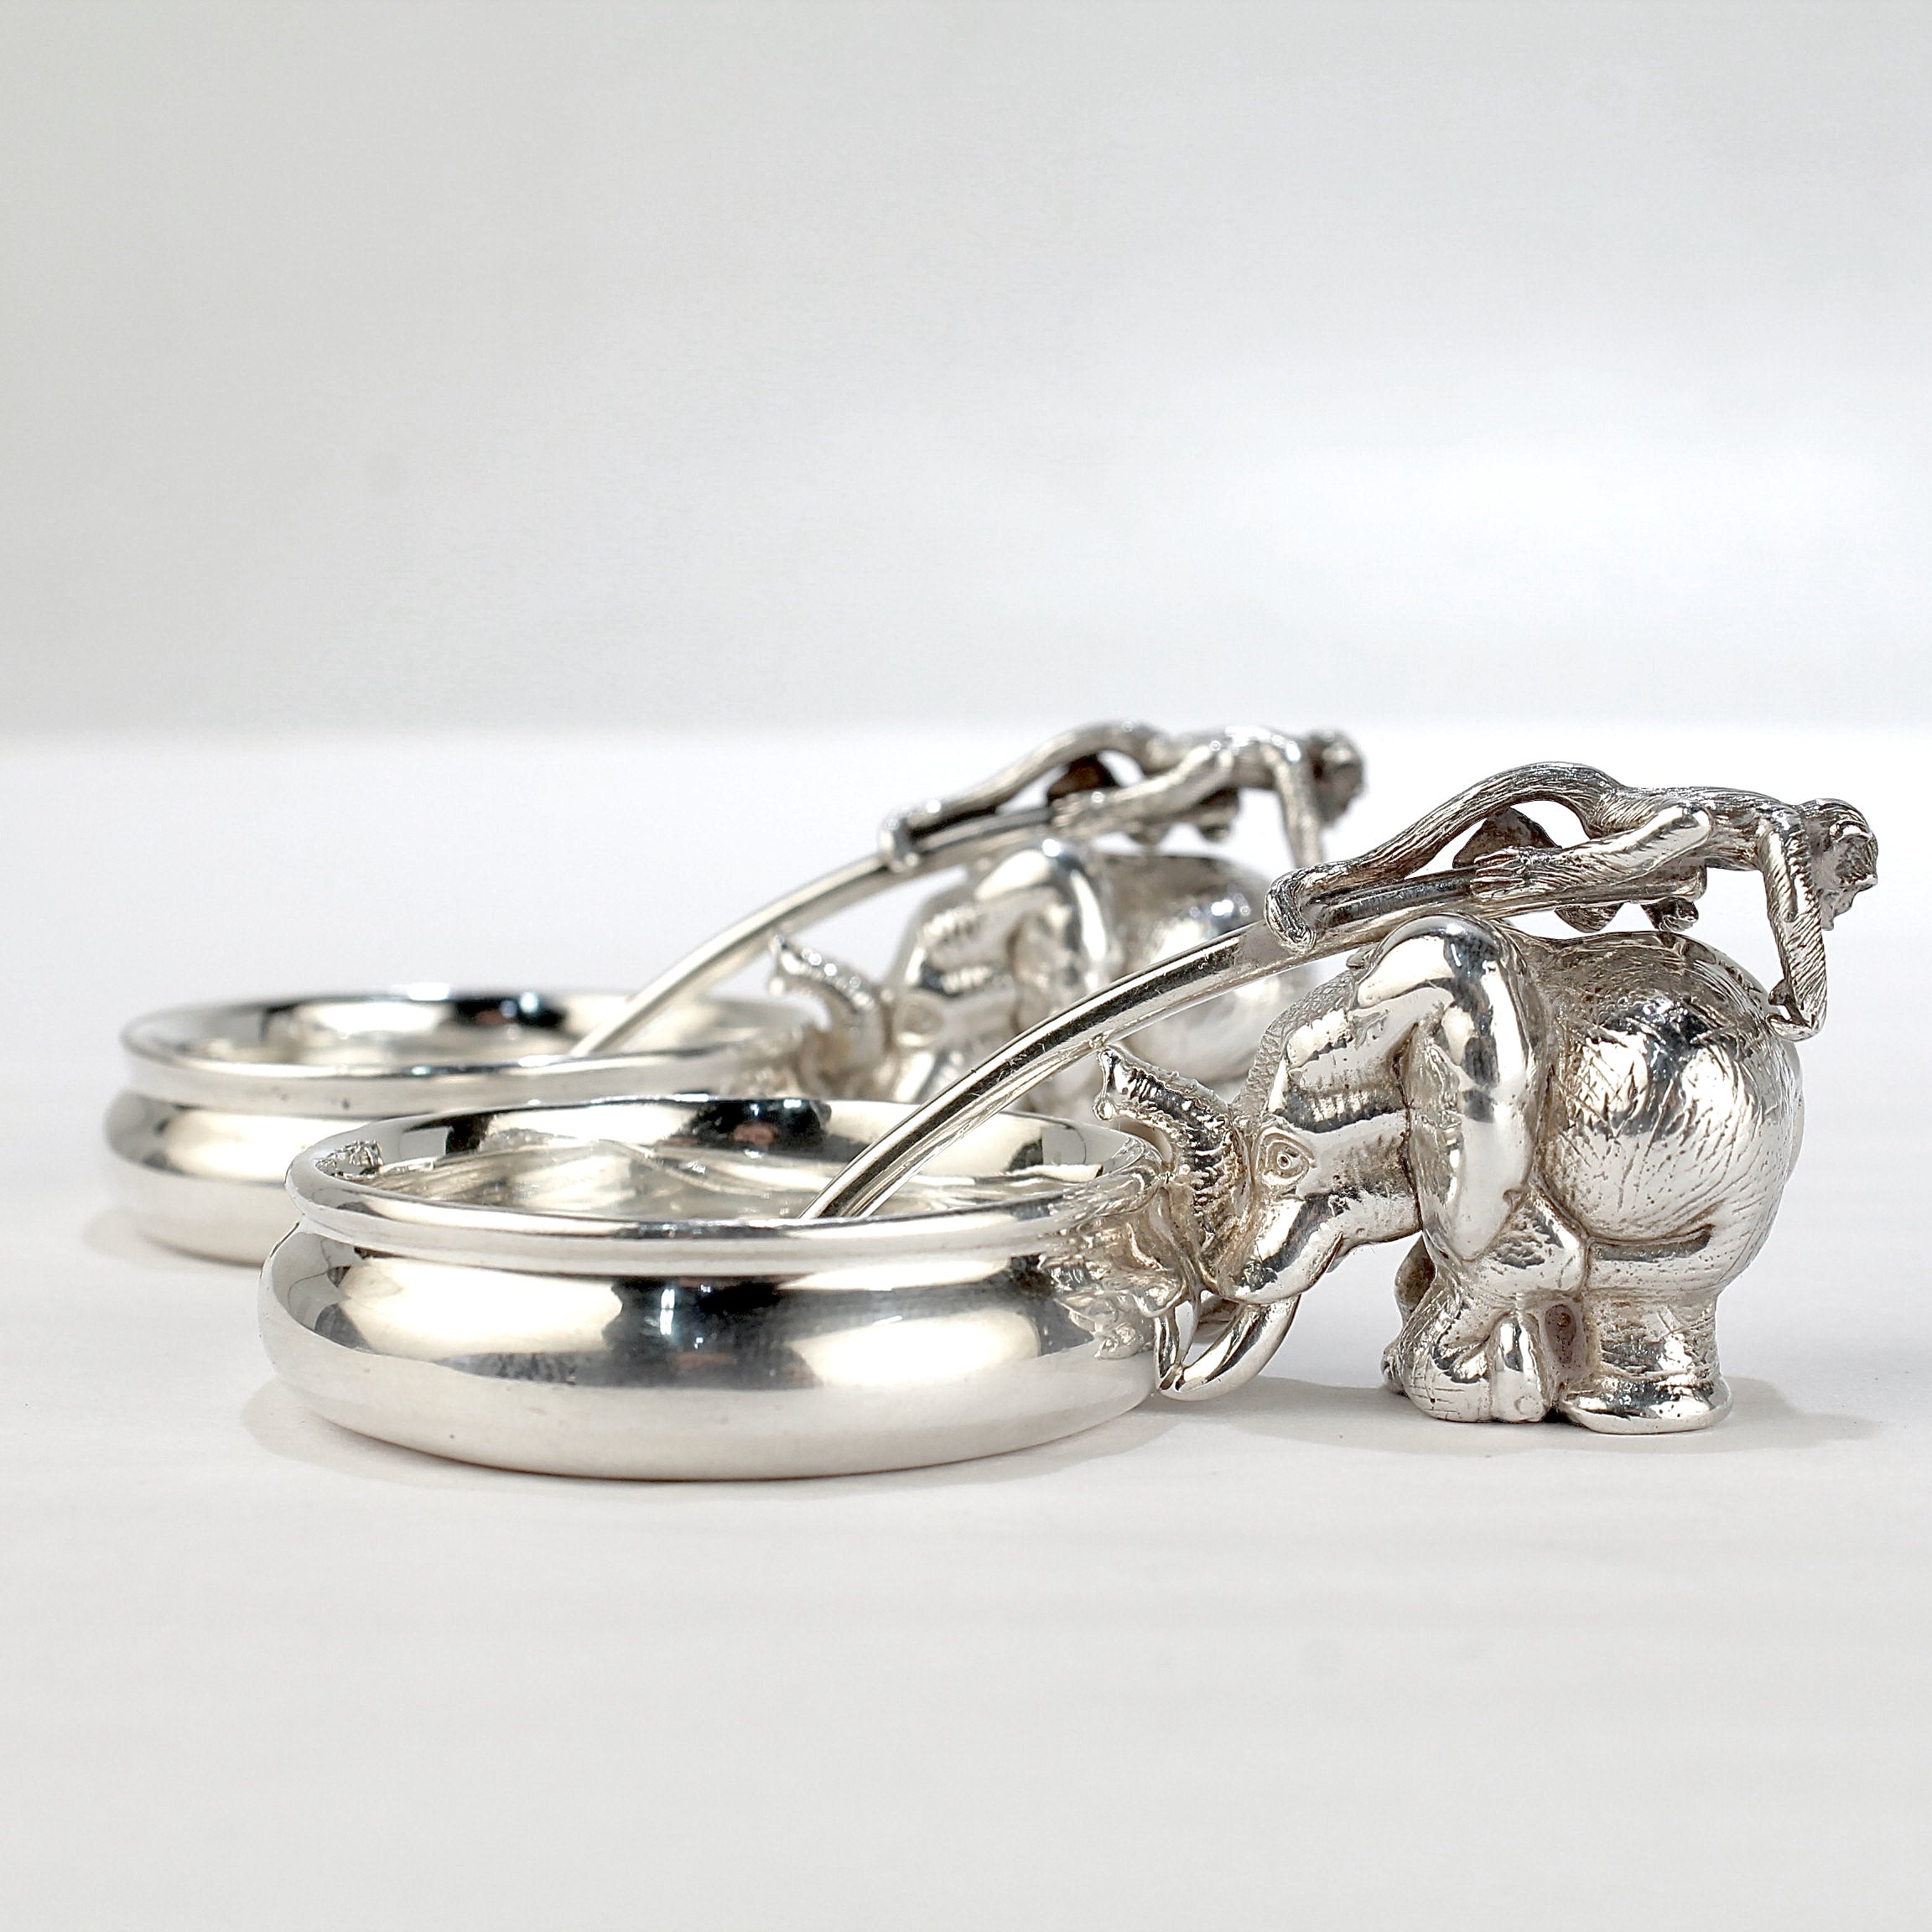 A fine pair of sterling silver figural mustard pots or salt cellars.

By Patrick Mavros, the Zimbabwean luxury jewelry maker. 

First made in 1998, the Ele mustard pot is modeled with an elephant to one side and is accompanied by a monkey handled